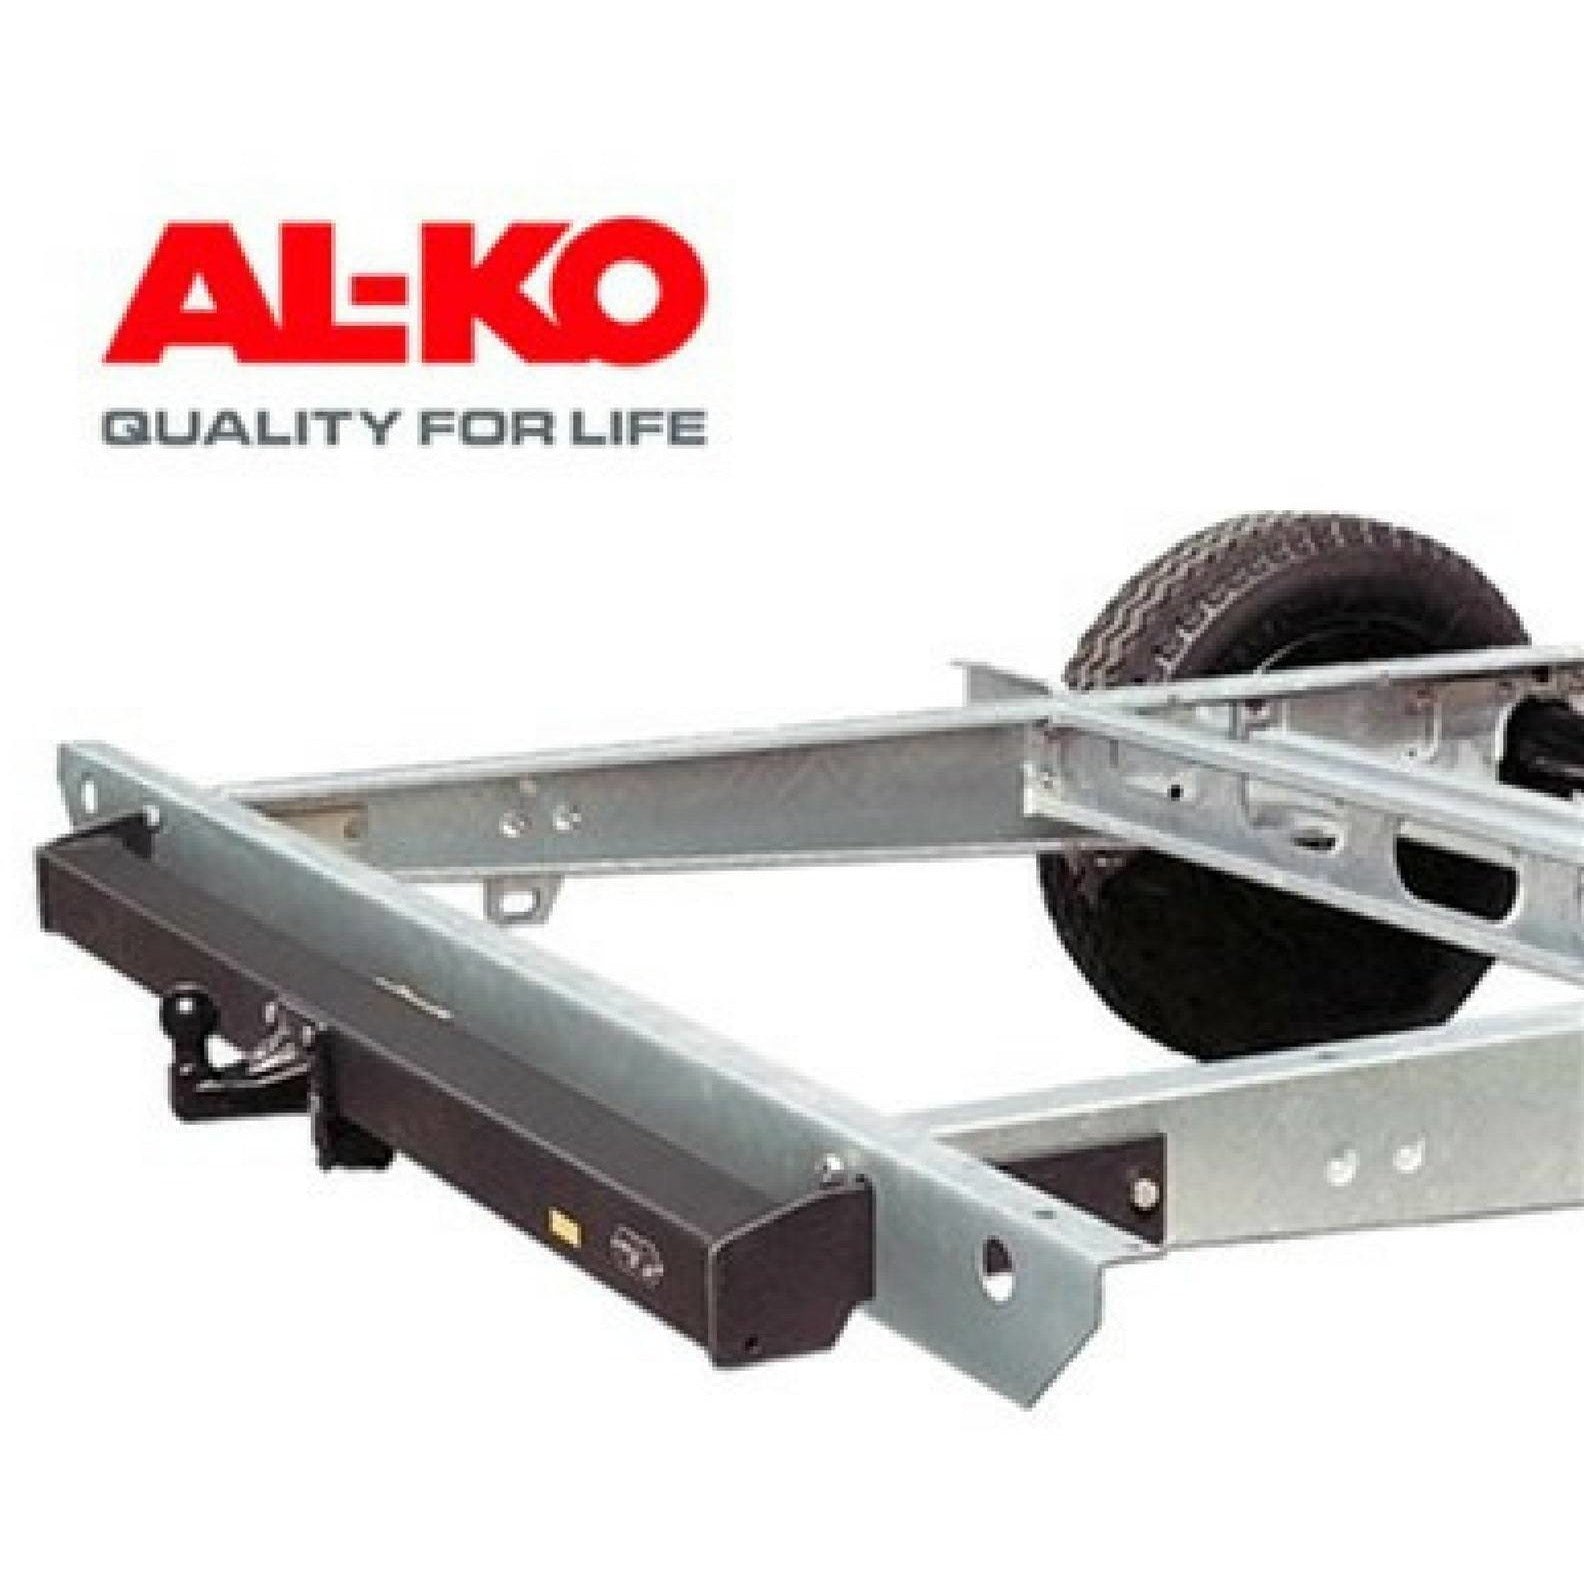 ALKO Sprinter/Crafter Towbar CW Fixed Towball made by ALKO. A Towing sold by Quality Caravan Awnings